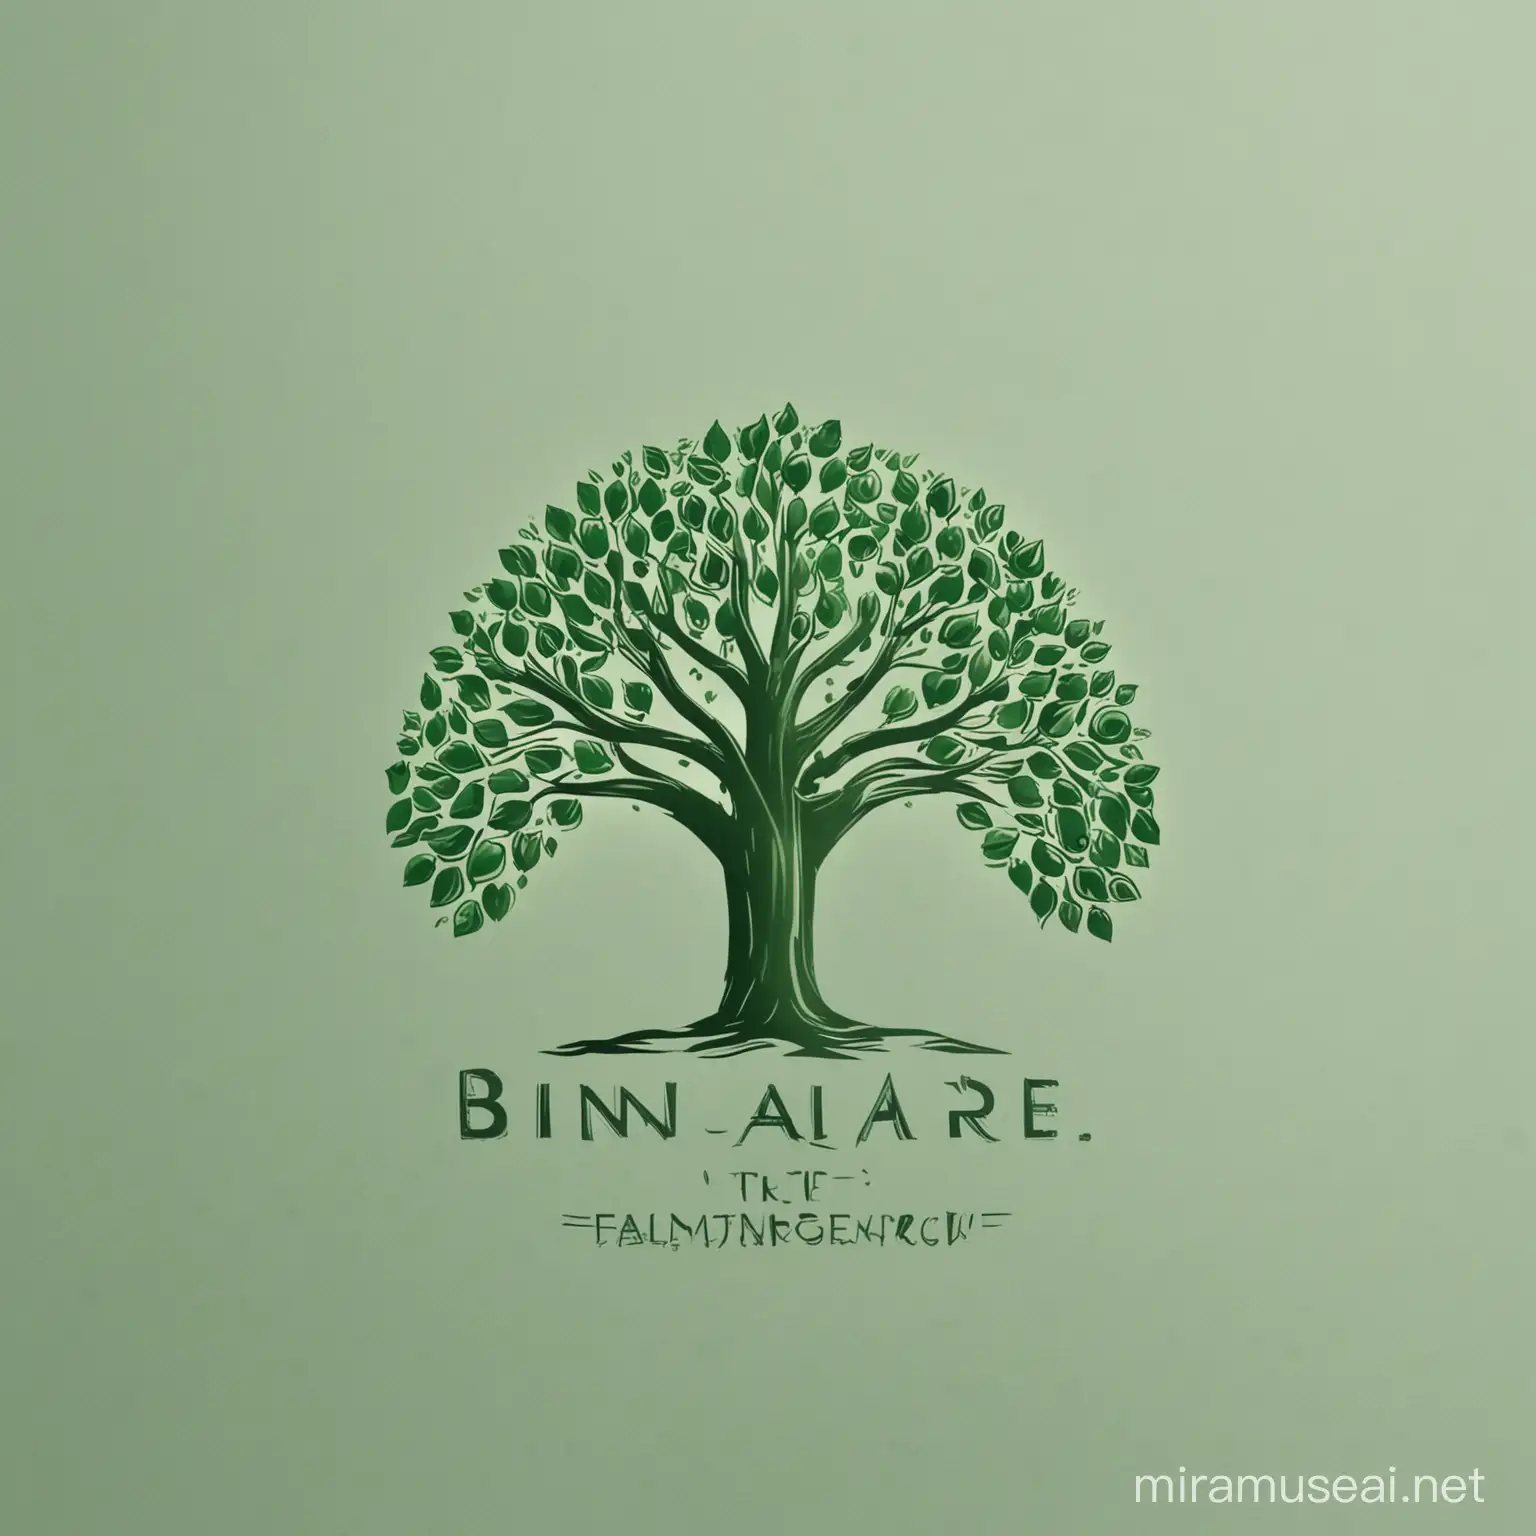 logo for a hedge fund, binomial tree, green